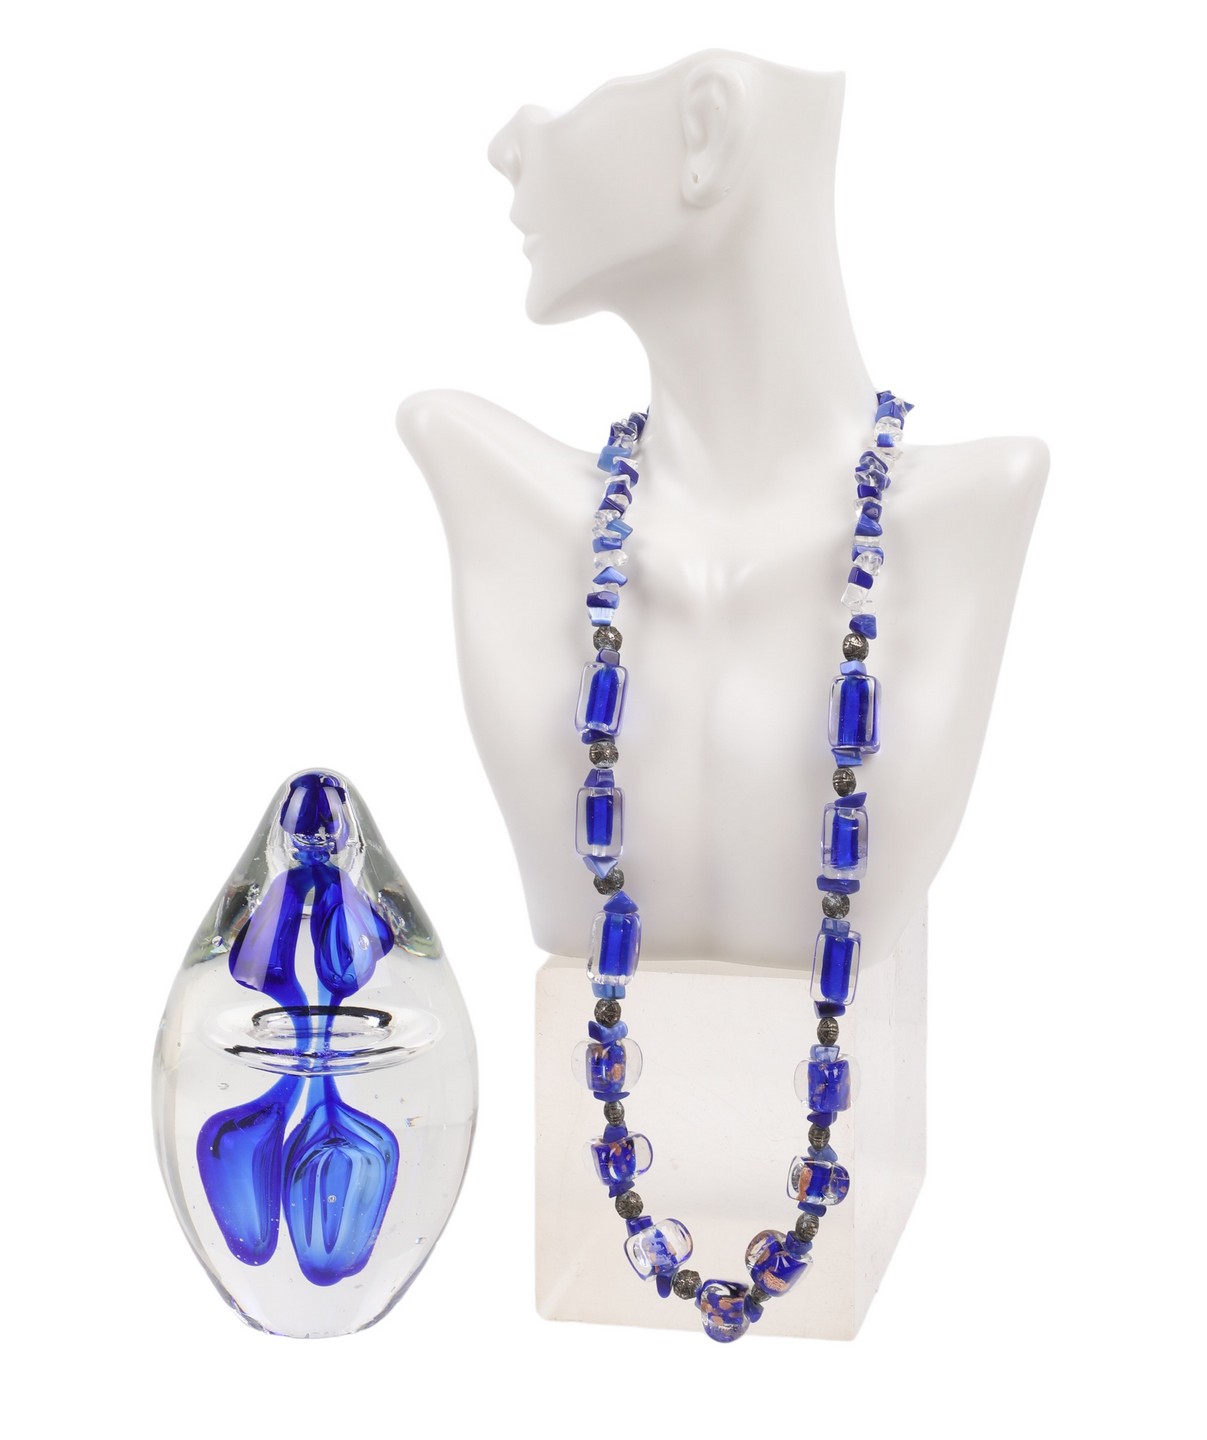 Murano glass necklace and weight